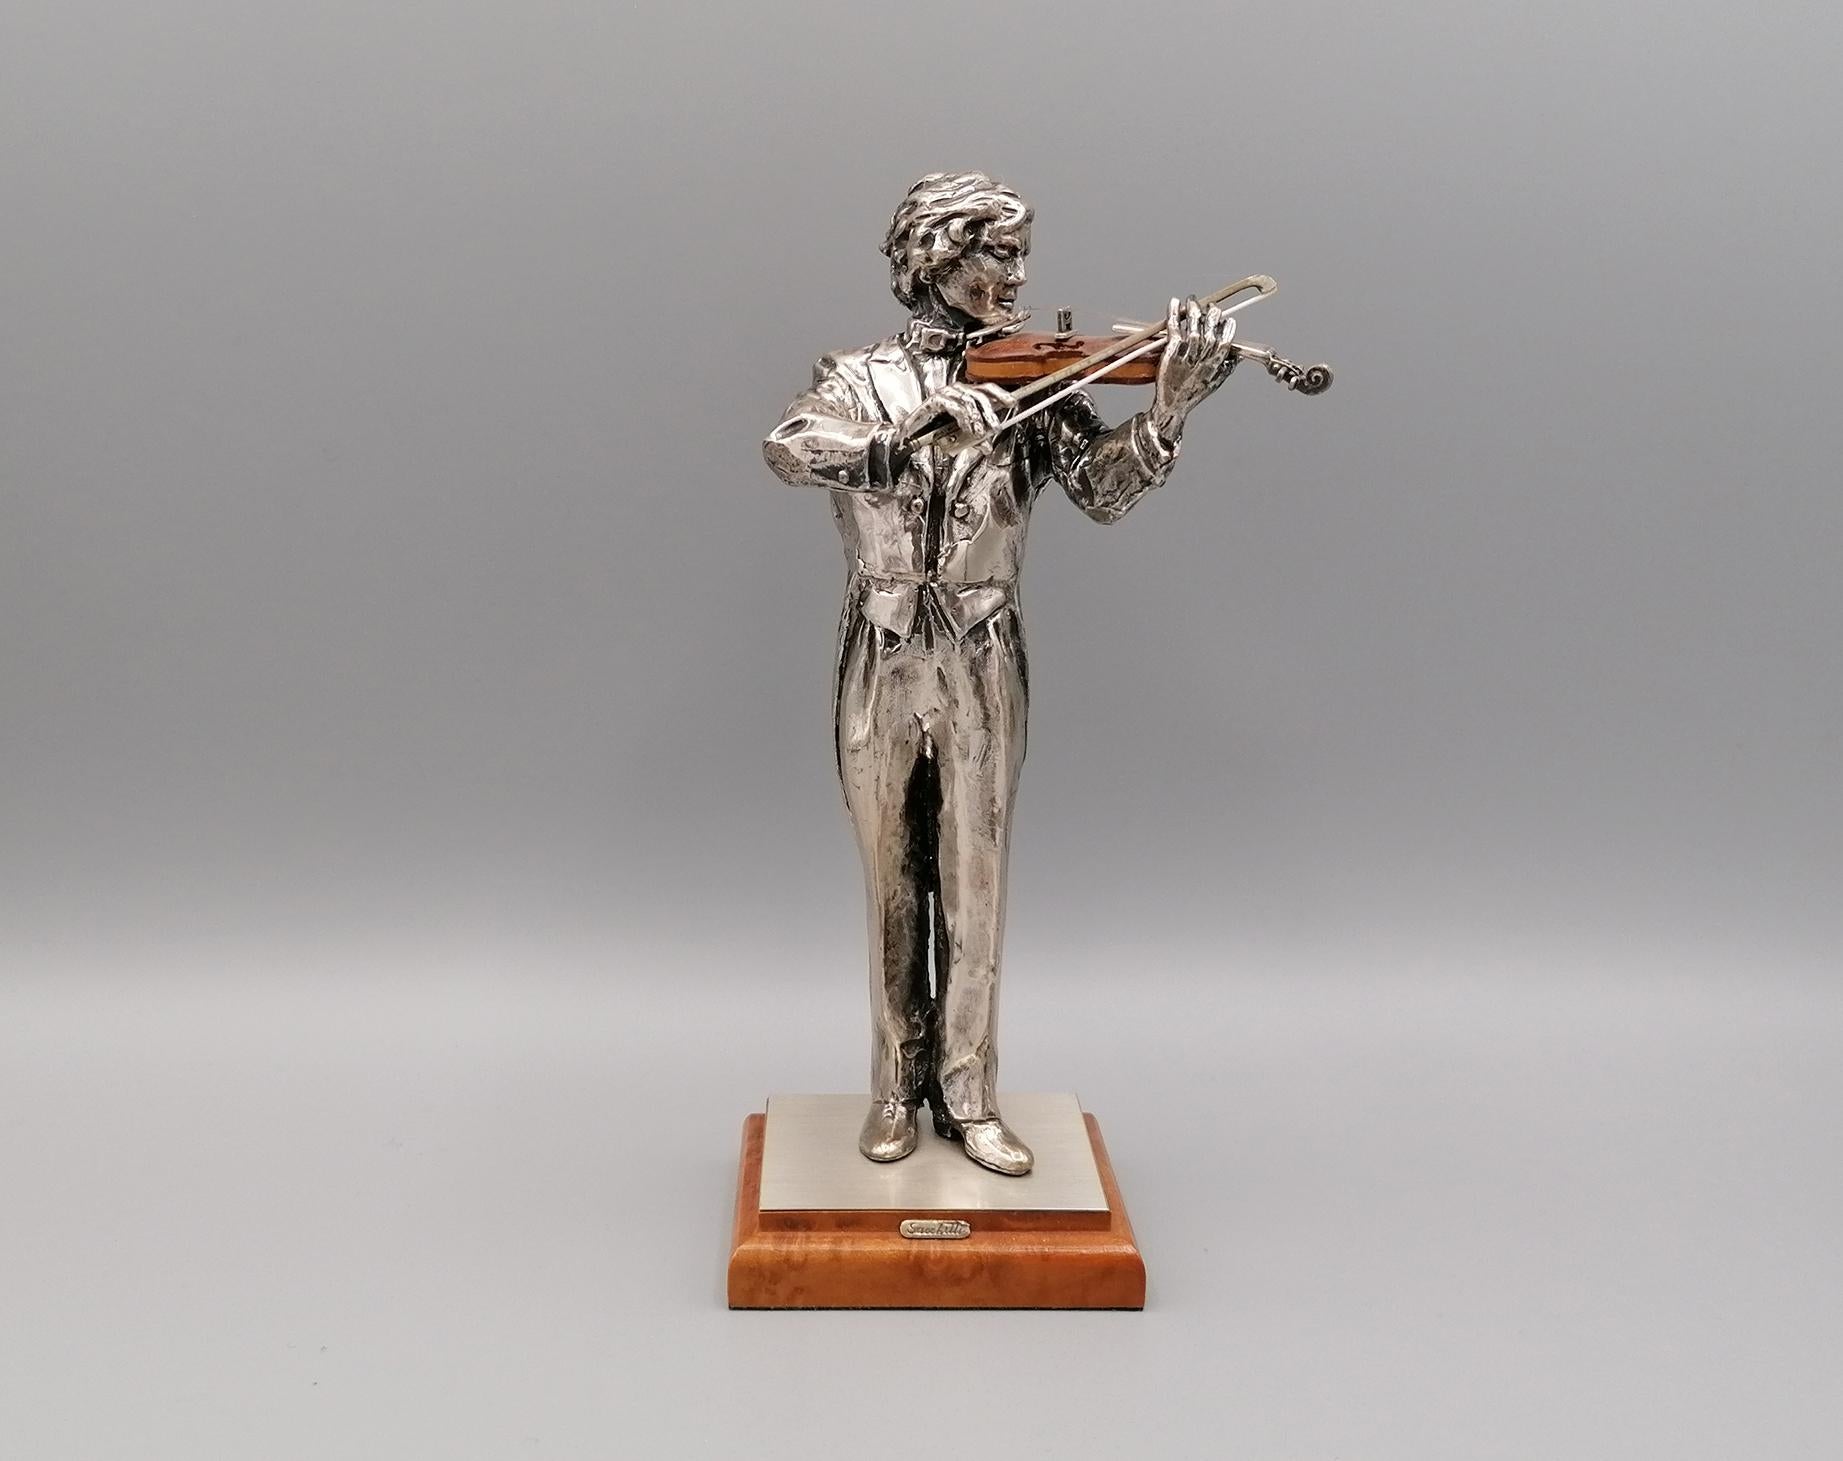 Violin player in 800 solid silver. The violin is in briar with silver details.
The violin bow is in silver.
The player and the violin are positioned on a wooden base covered in silver at the top.